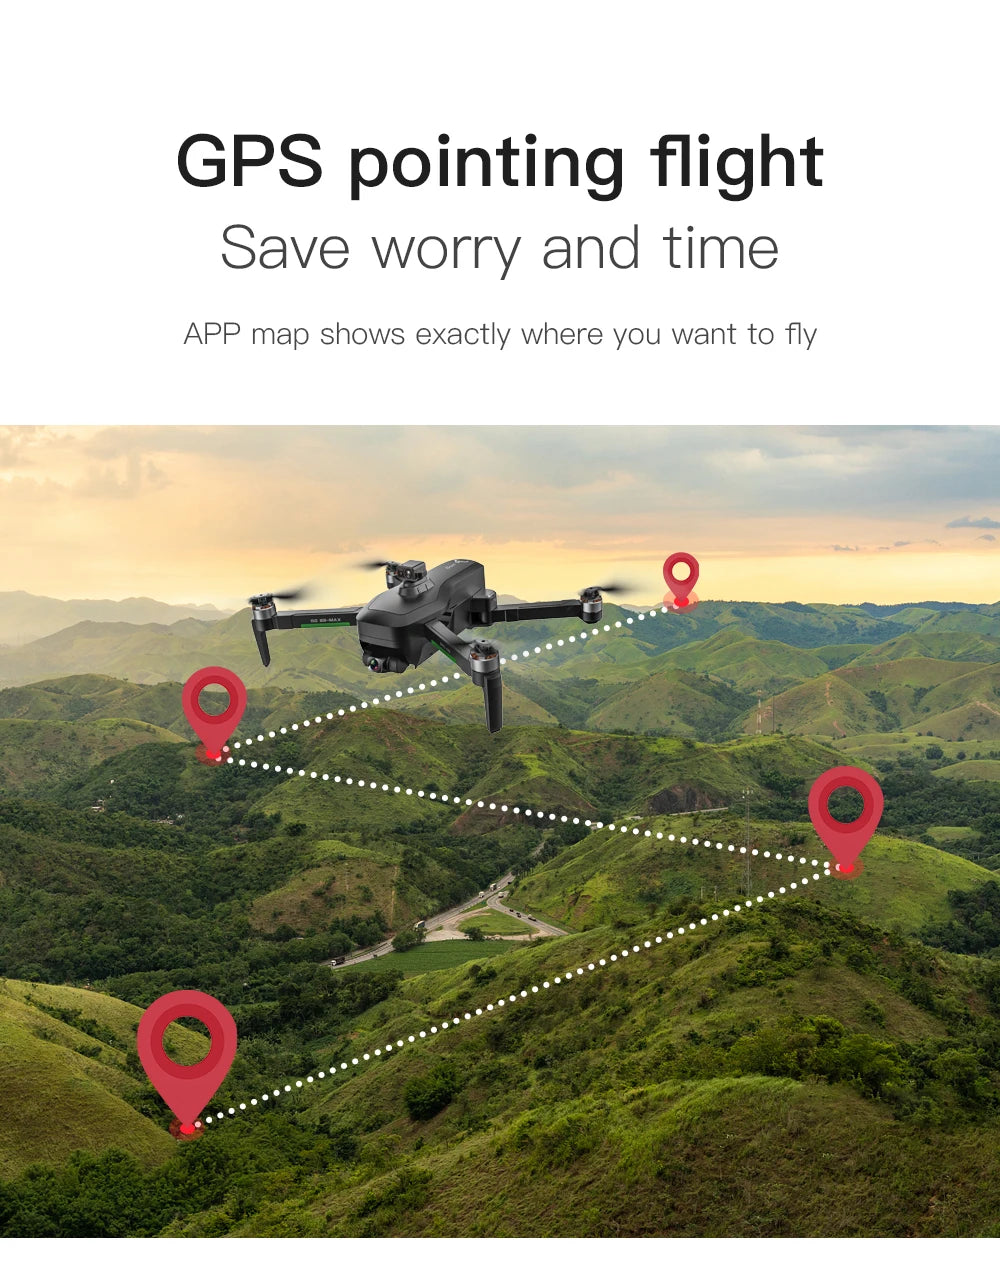 HGIYI SG906 MAX2  Drone, GPS pointing flight Save worry and time APP map shows exactly where you want to